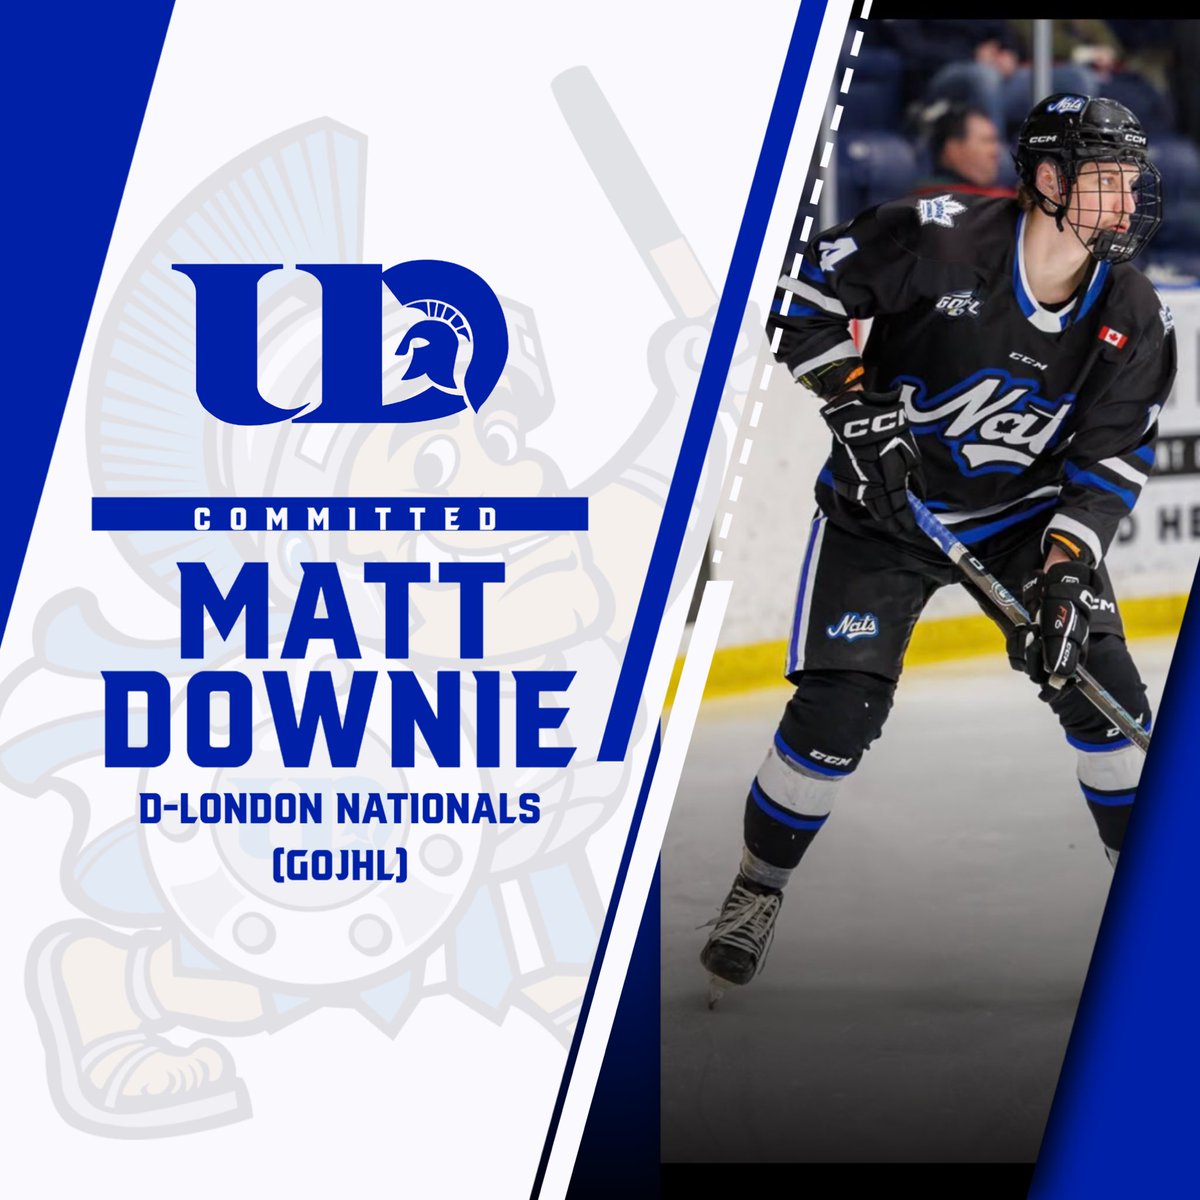 Welcome to the University of Dubuque, Matt! #UDHockey